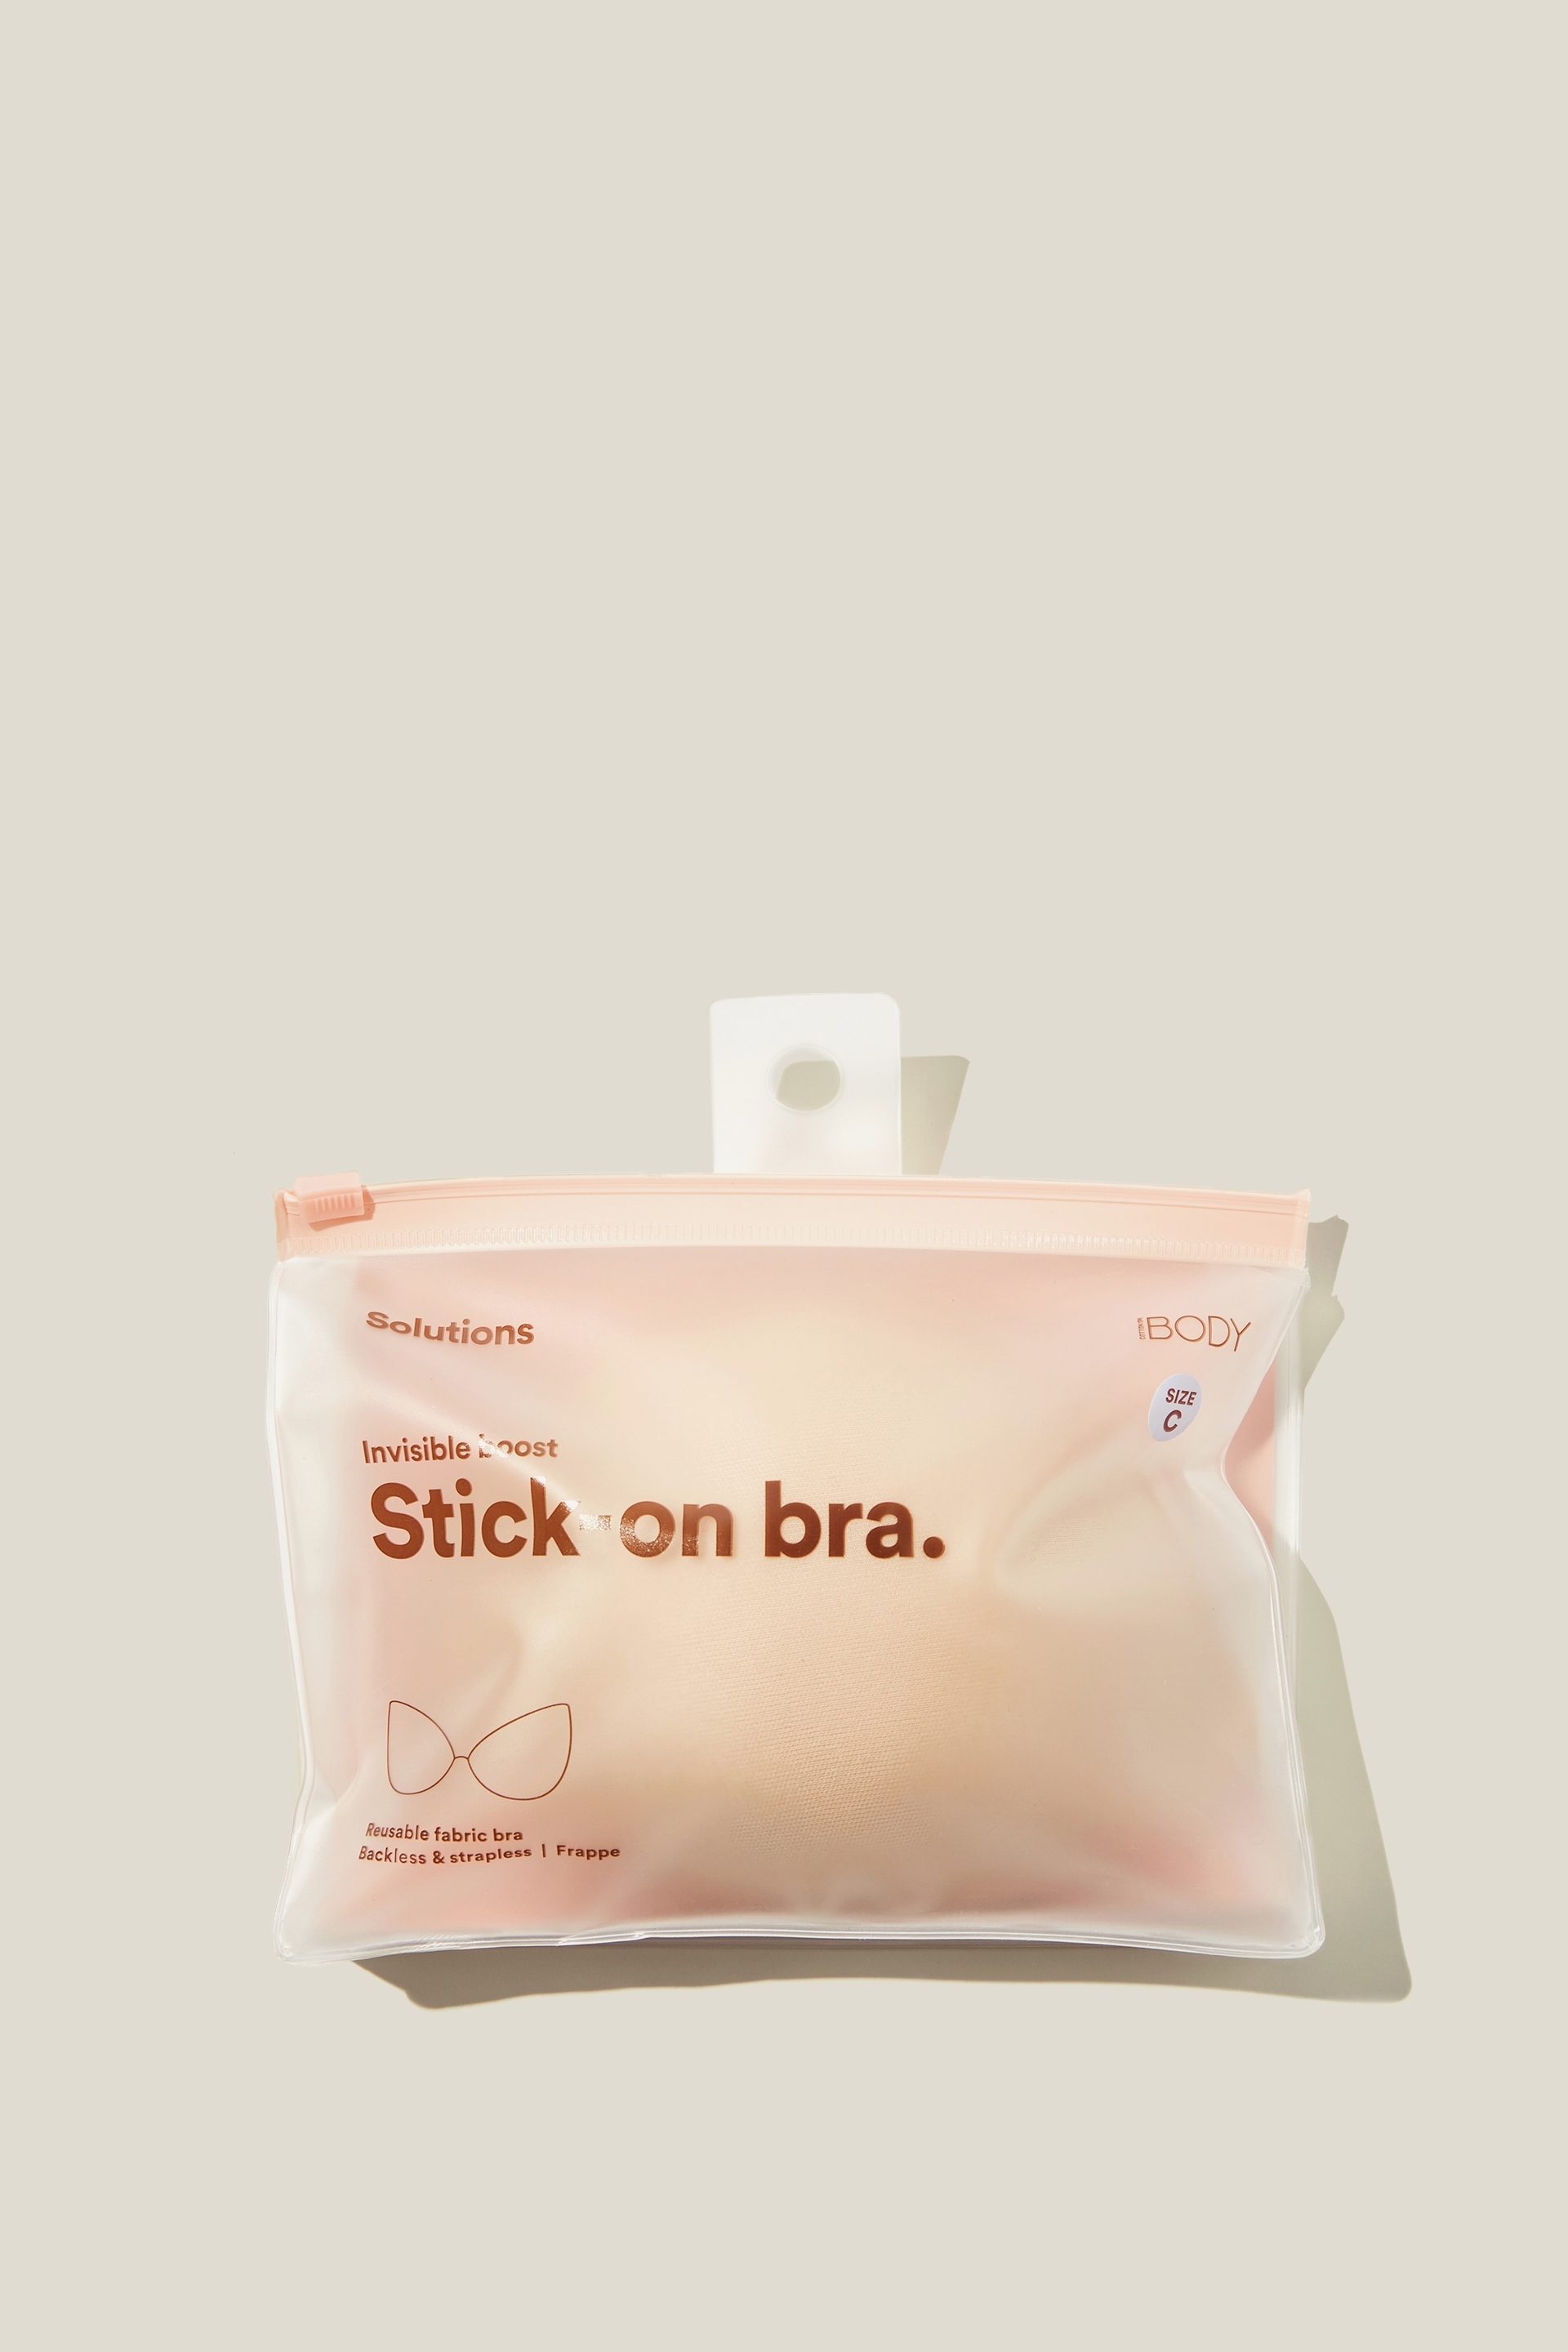 Over 11,000  shoppers say this is the best sticky bra they